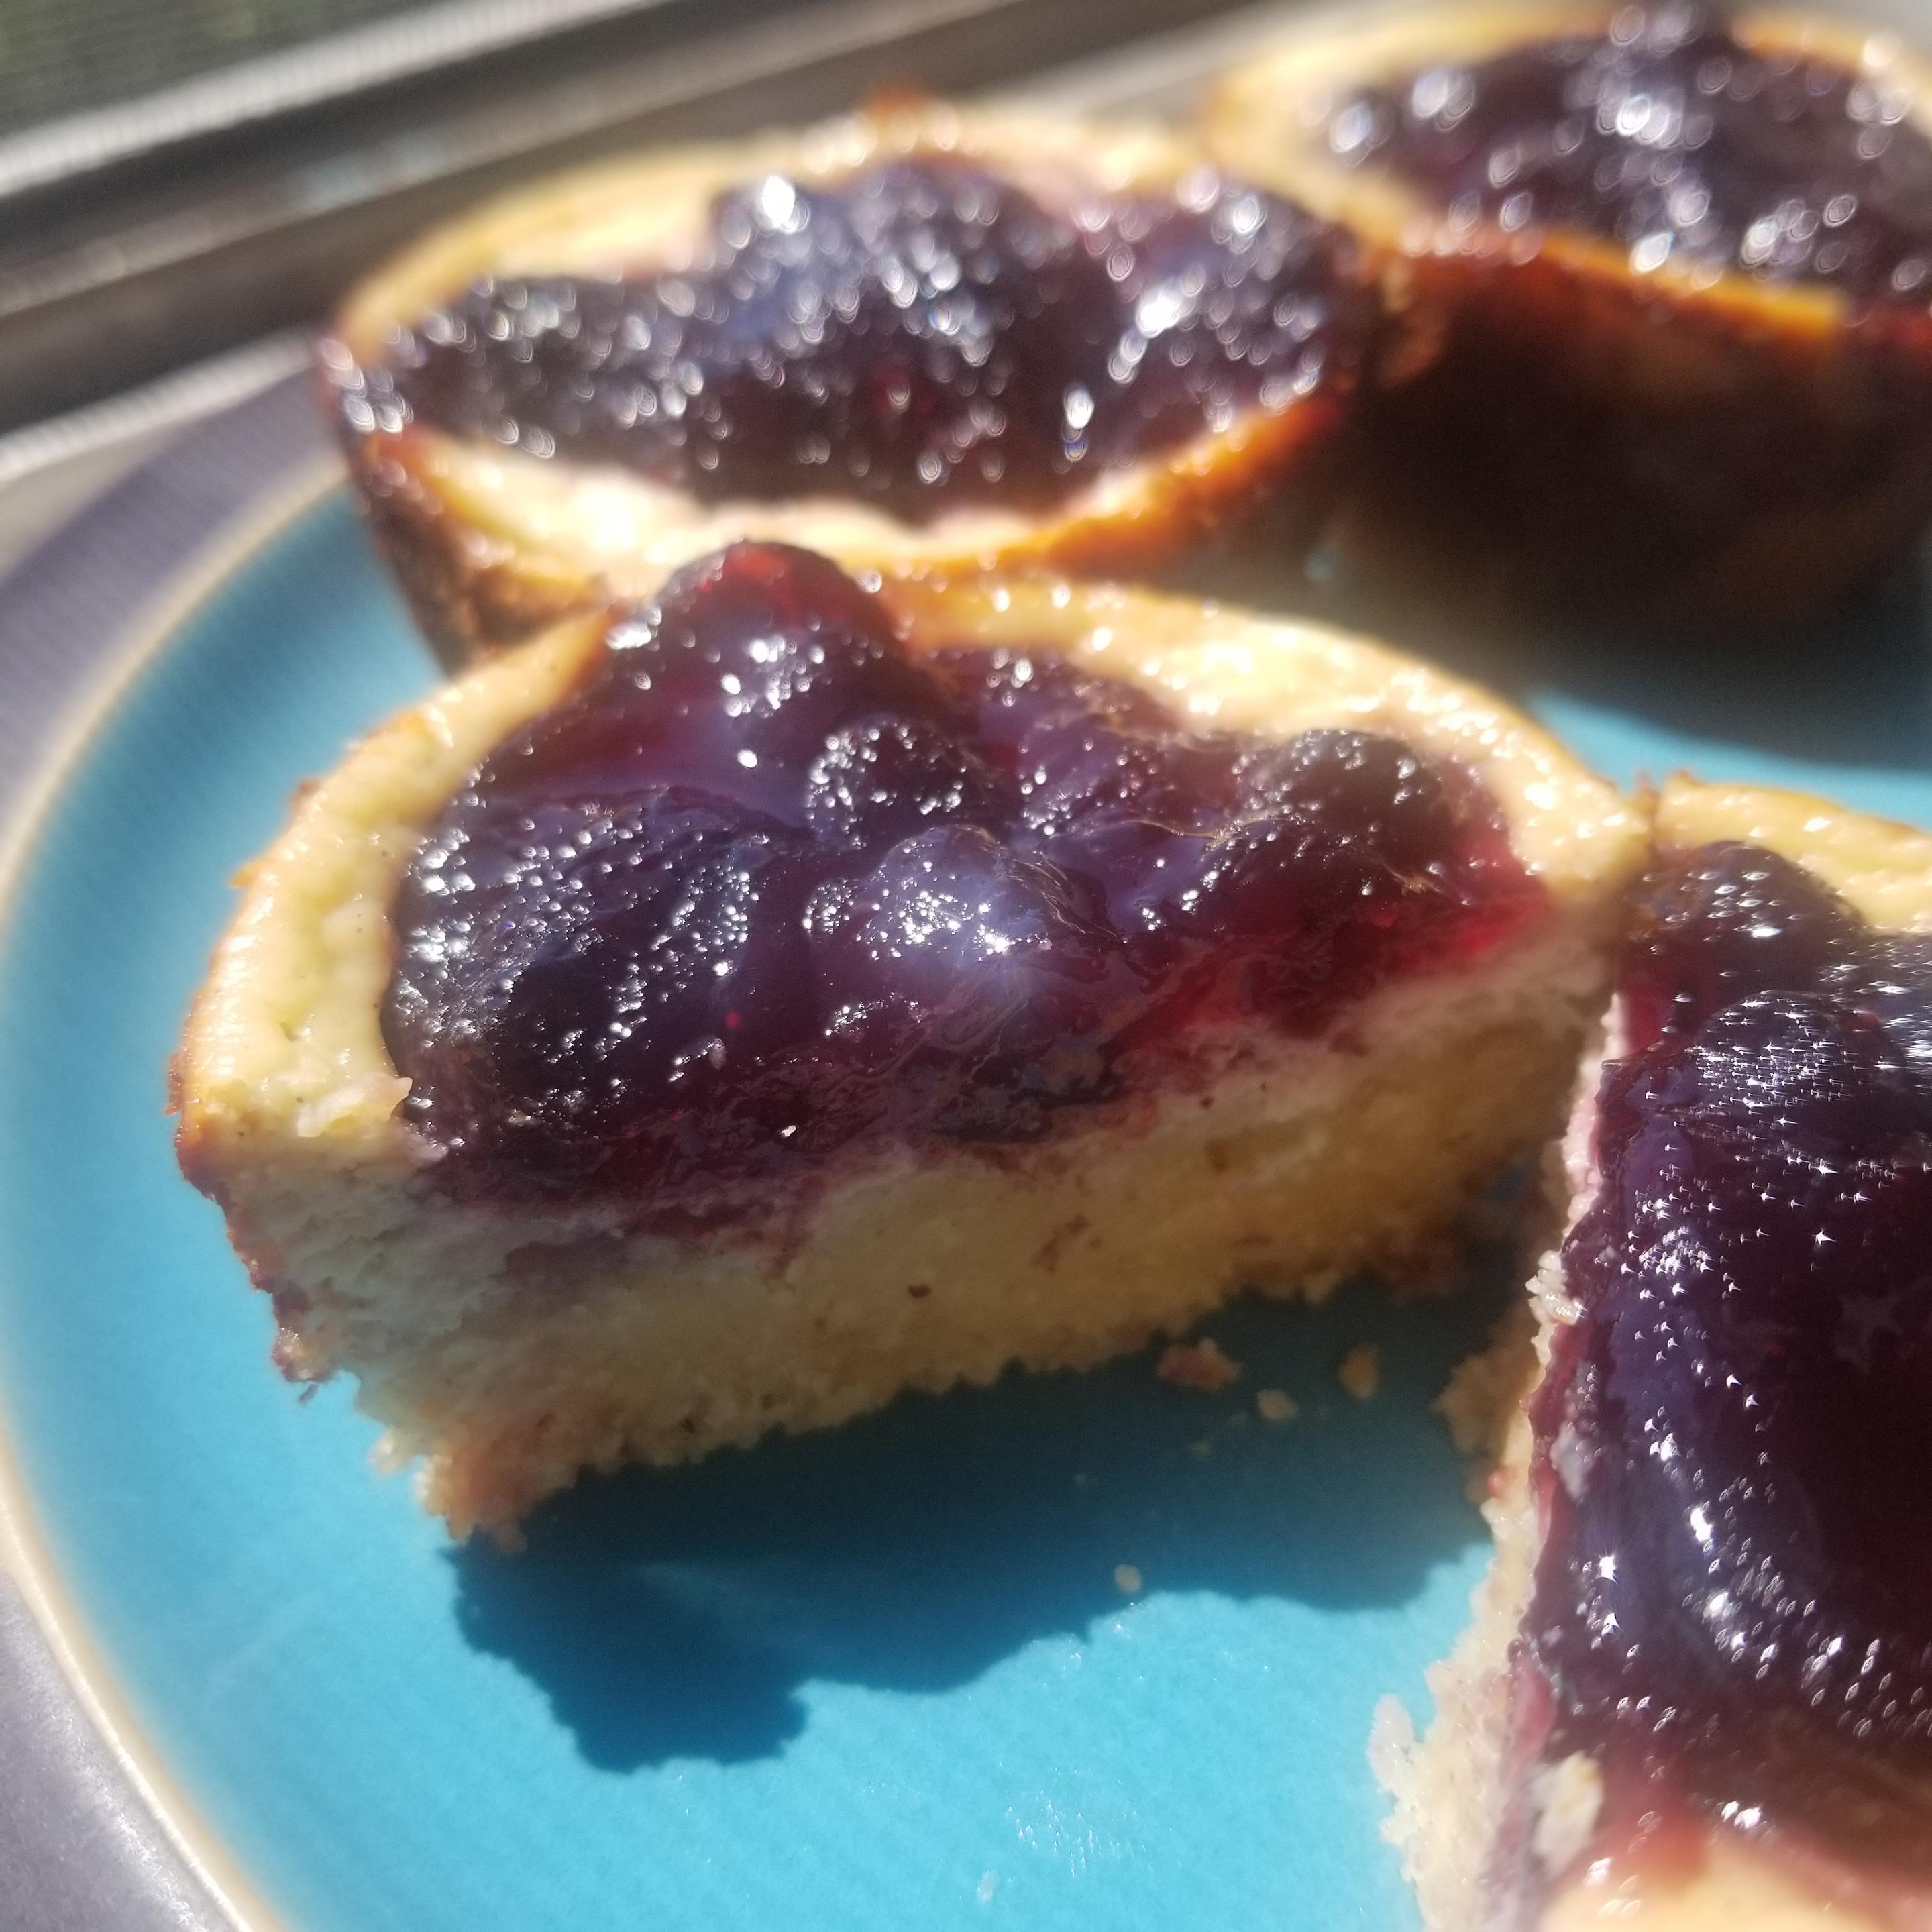 Photo of beautiful blueberry tarts, with one cut open to show the delicious center.